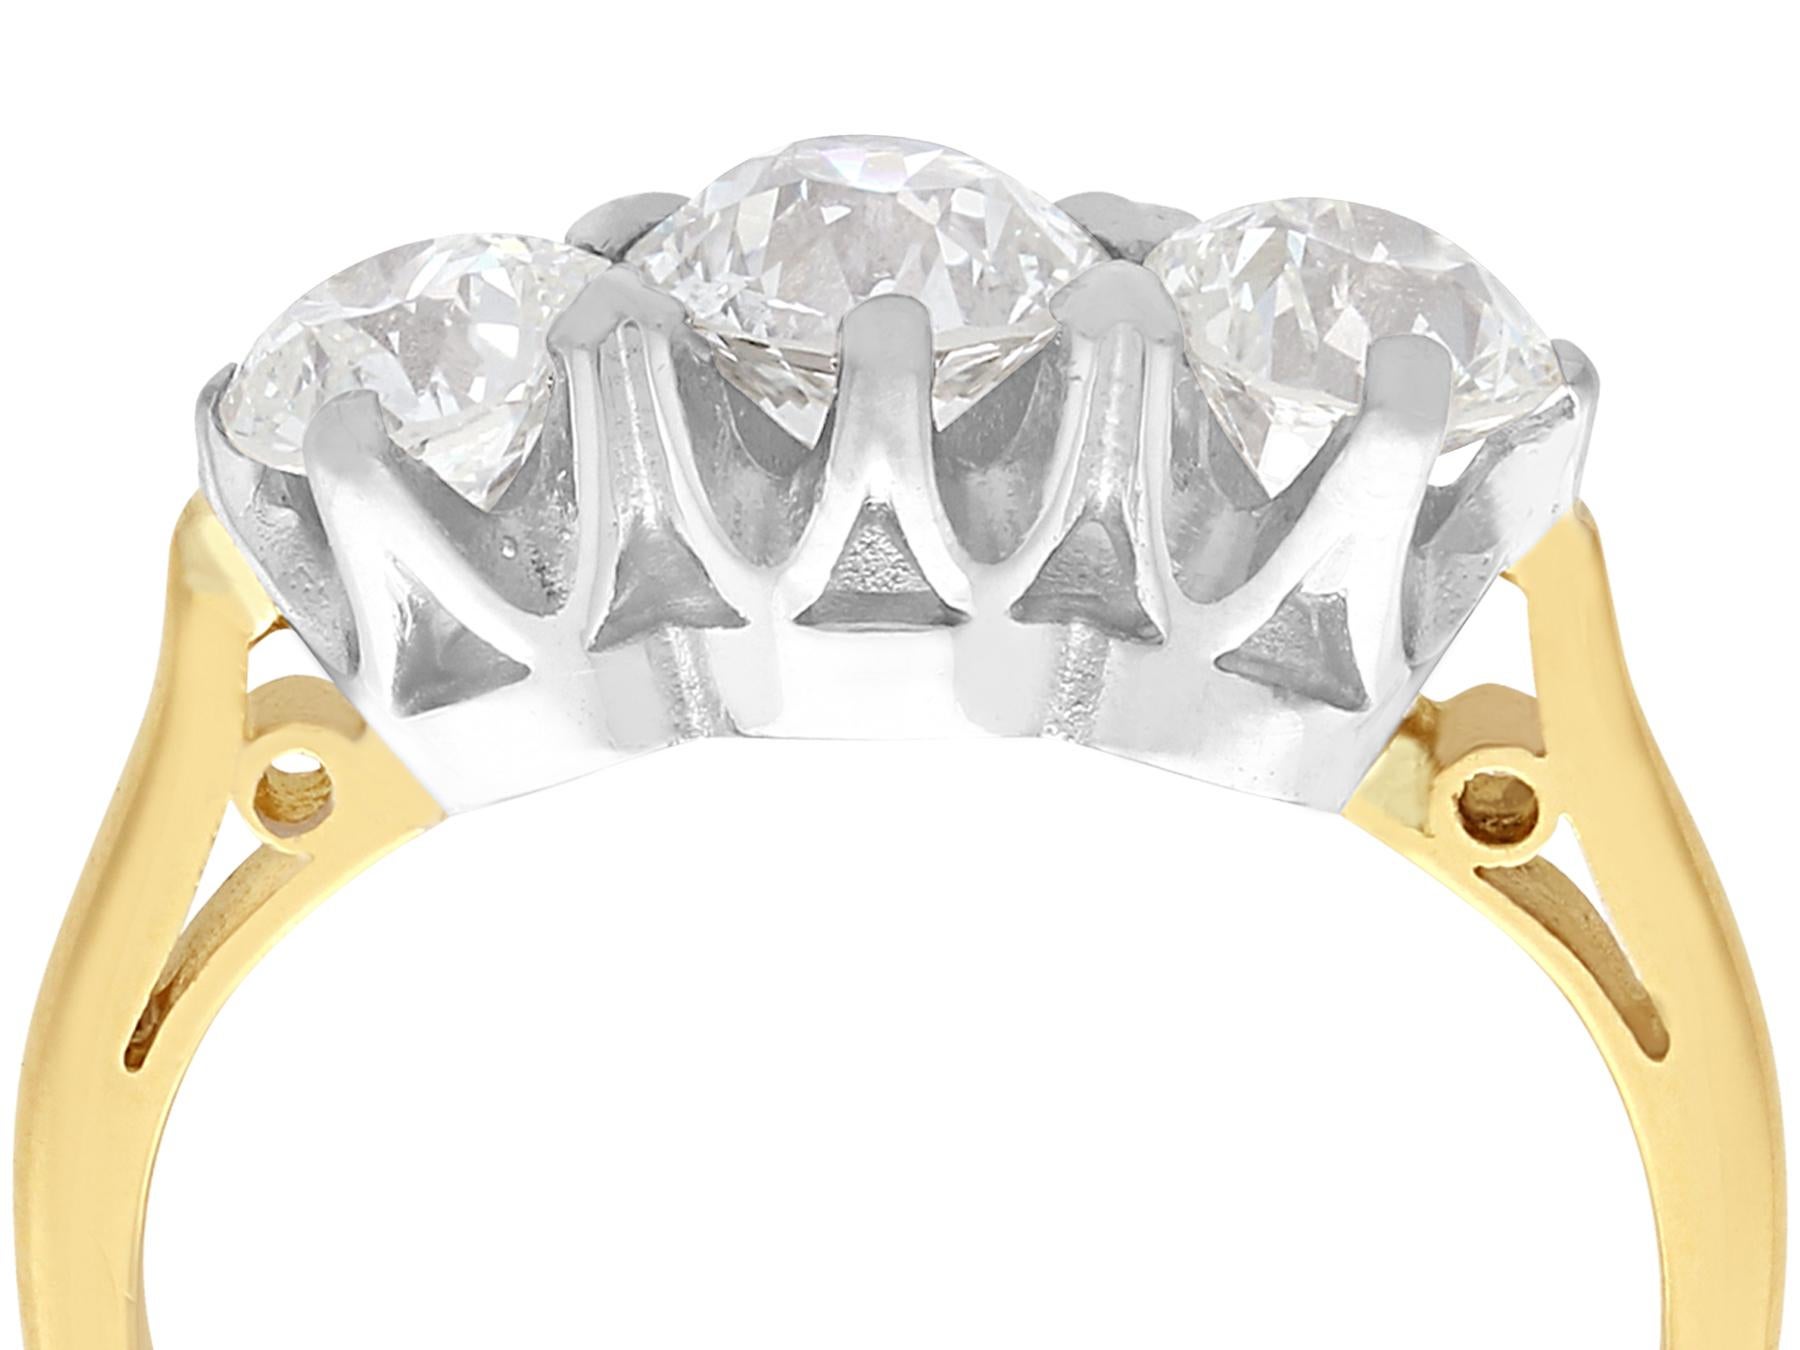 A stunning, fine and impressive antique 2.12 carat diamond three stone ring displayed in a contemporary 18 karat yellow gold and 18 karat white gold setting; part of our diamond jewellery and estate jewelry collections.

This stunning three stone